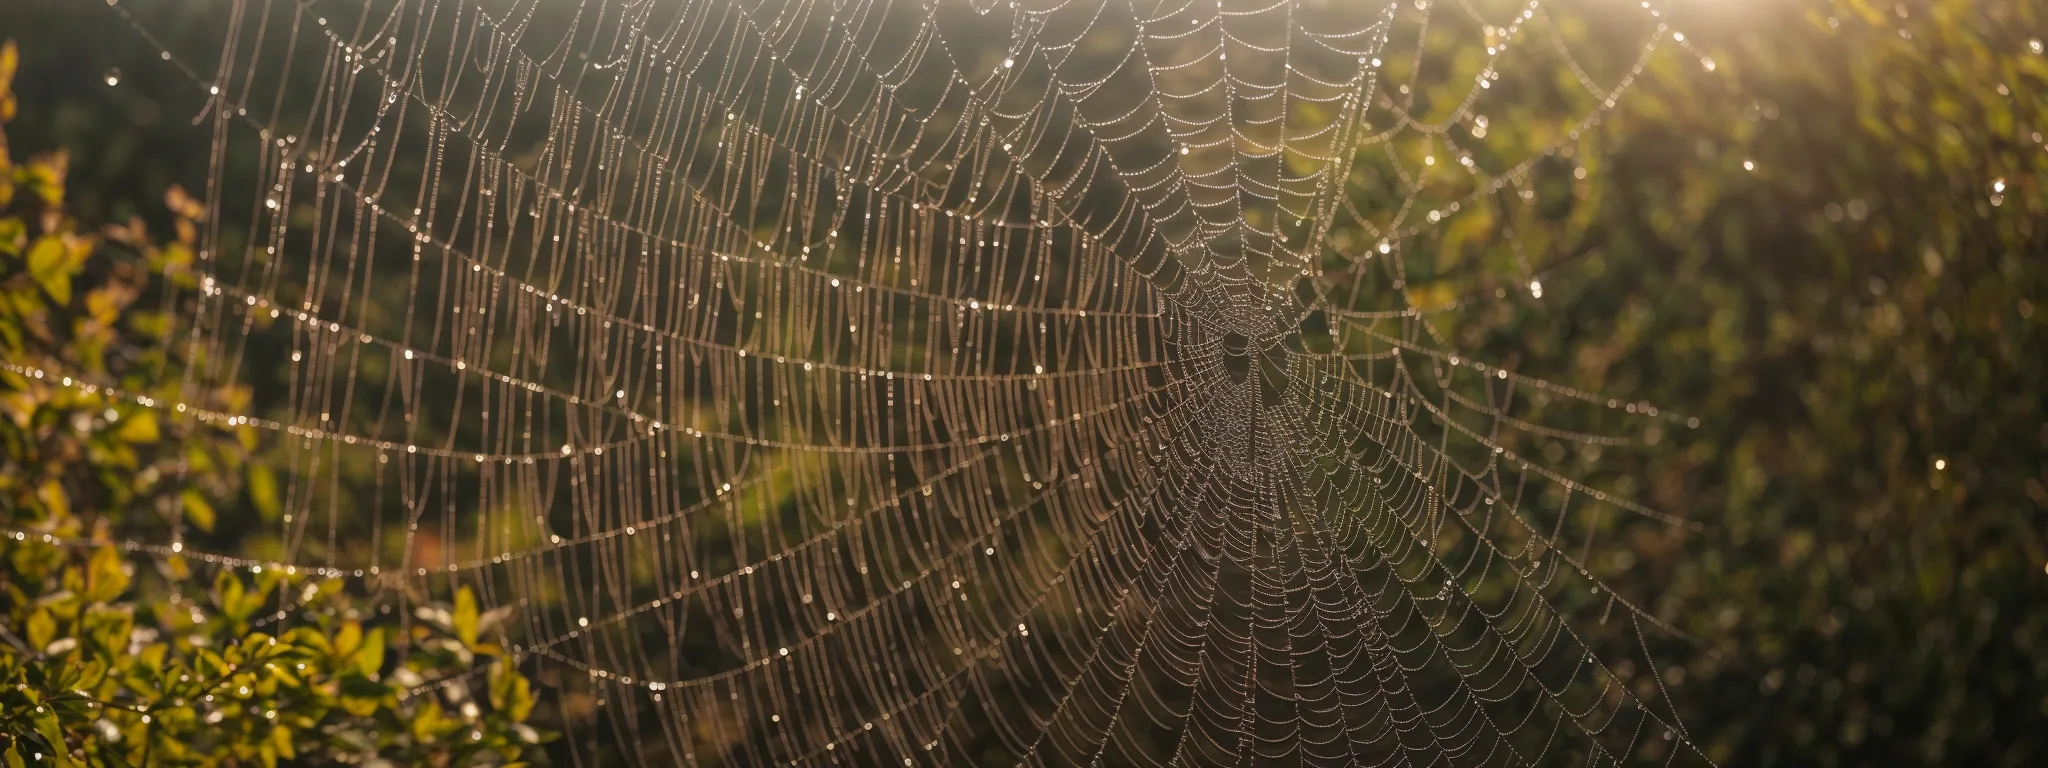 a spider web glistening with dew in the morning sun, symbolizing a complex and interconnected structure.